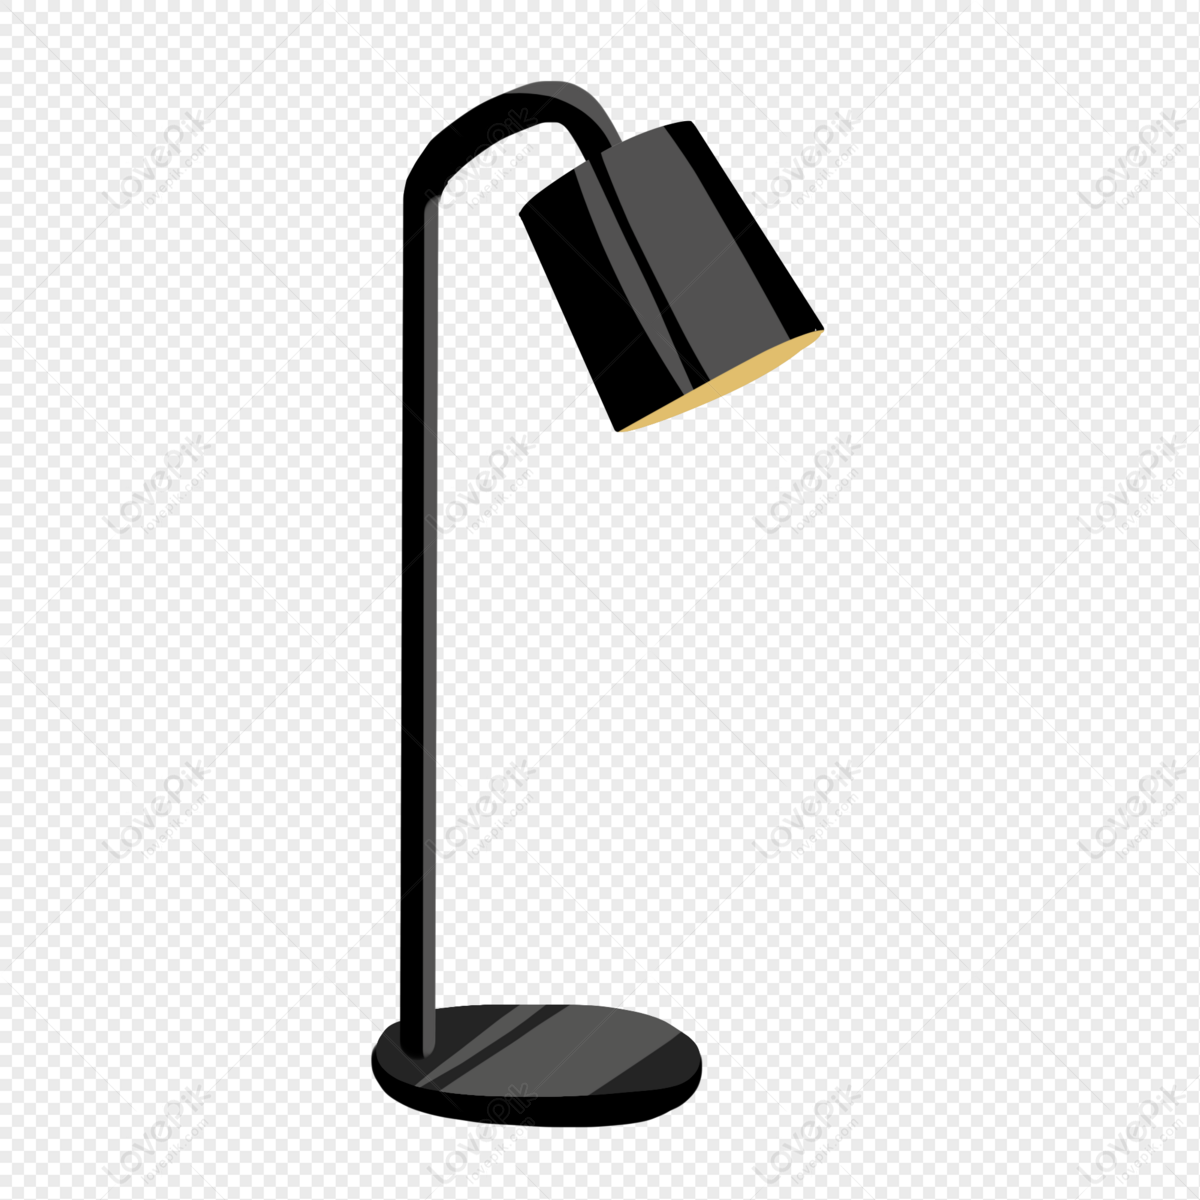 Cartoon Black Table Lamp Illustration PNG White Transparent And Clipart  Image For Free Download - Lovepik | 401289402